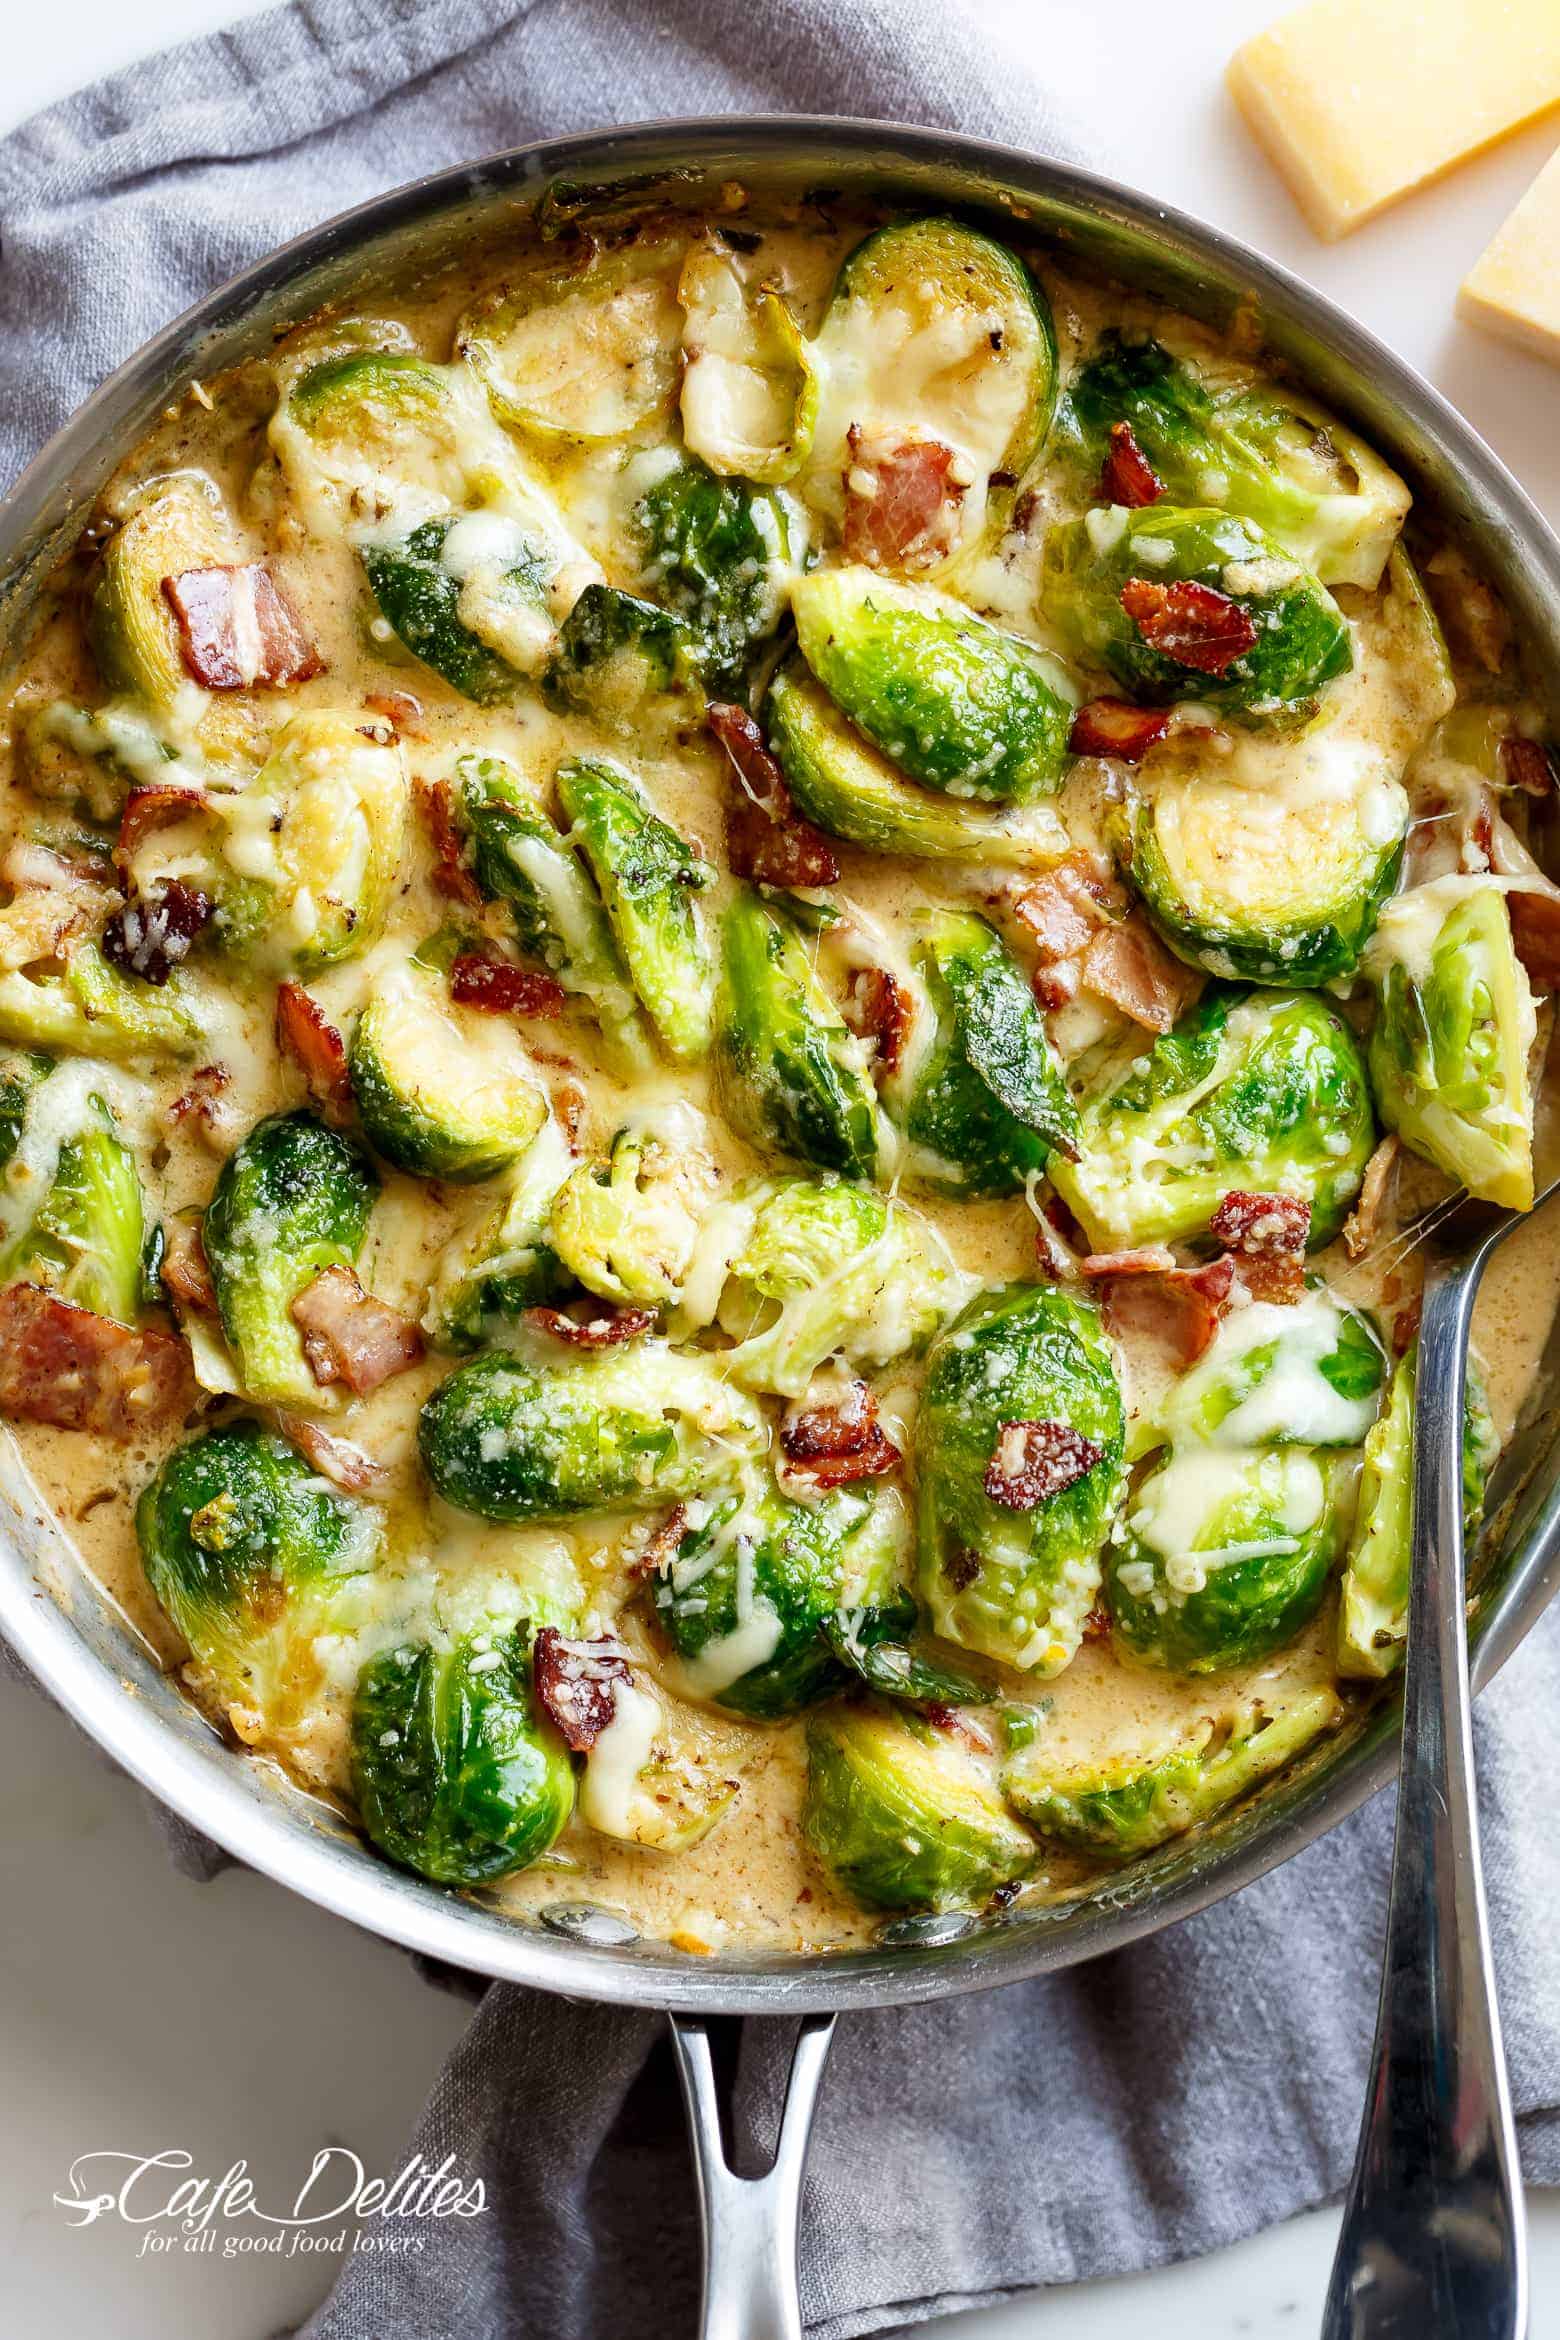 Brussel Sprouts With Cream Sauce and Bacon